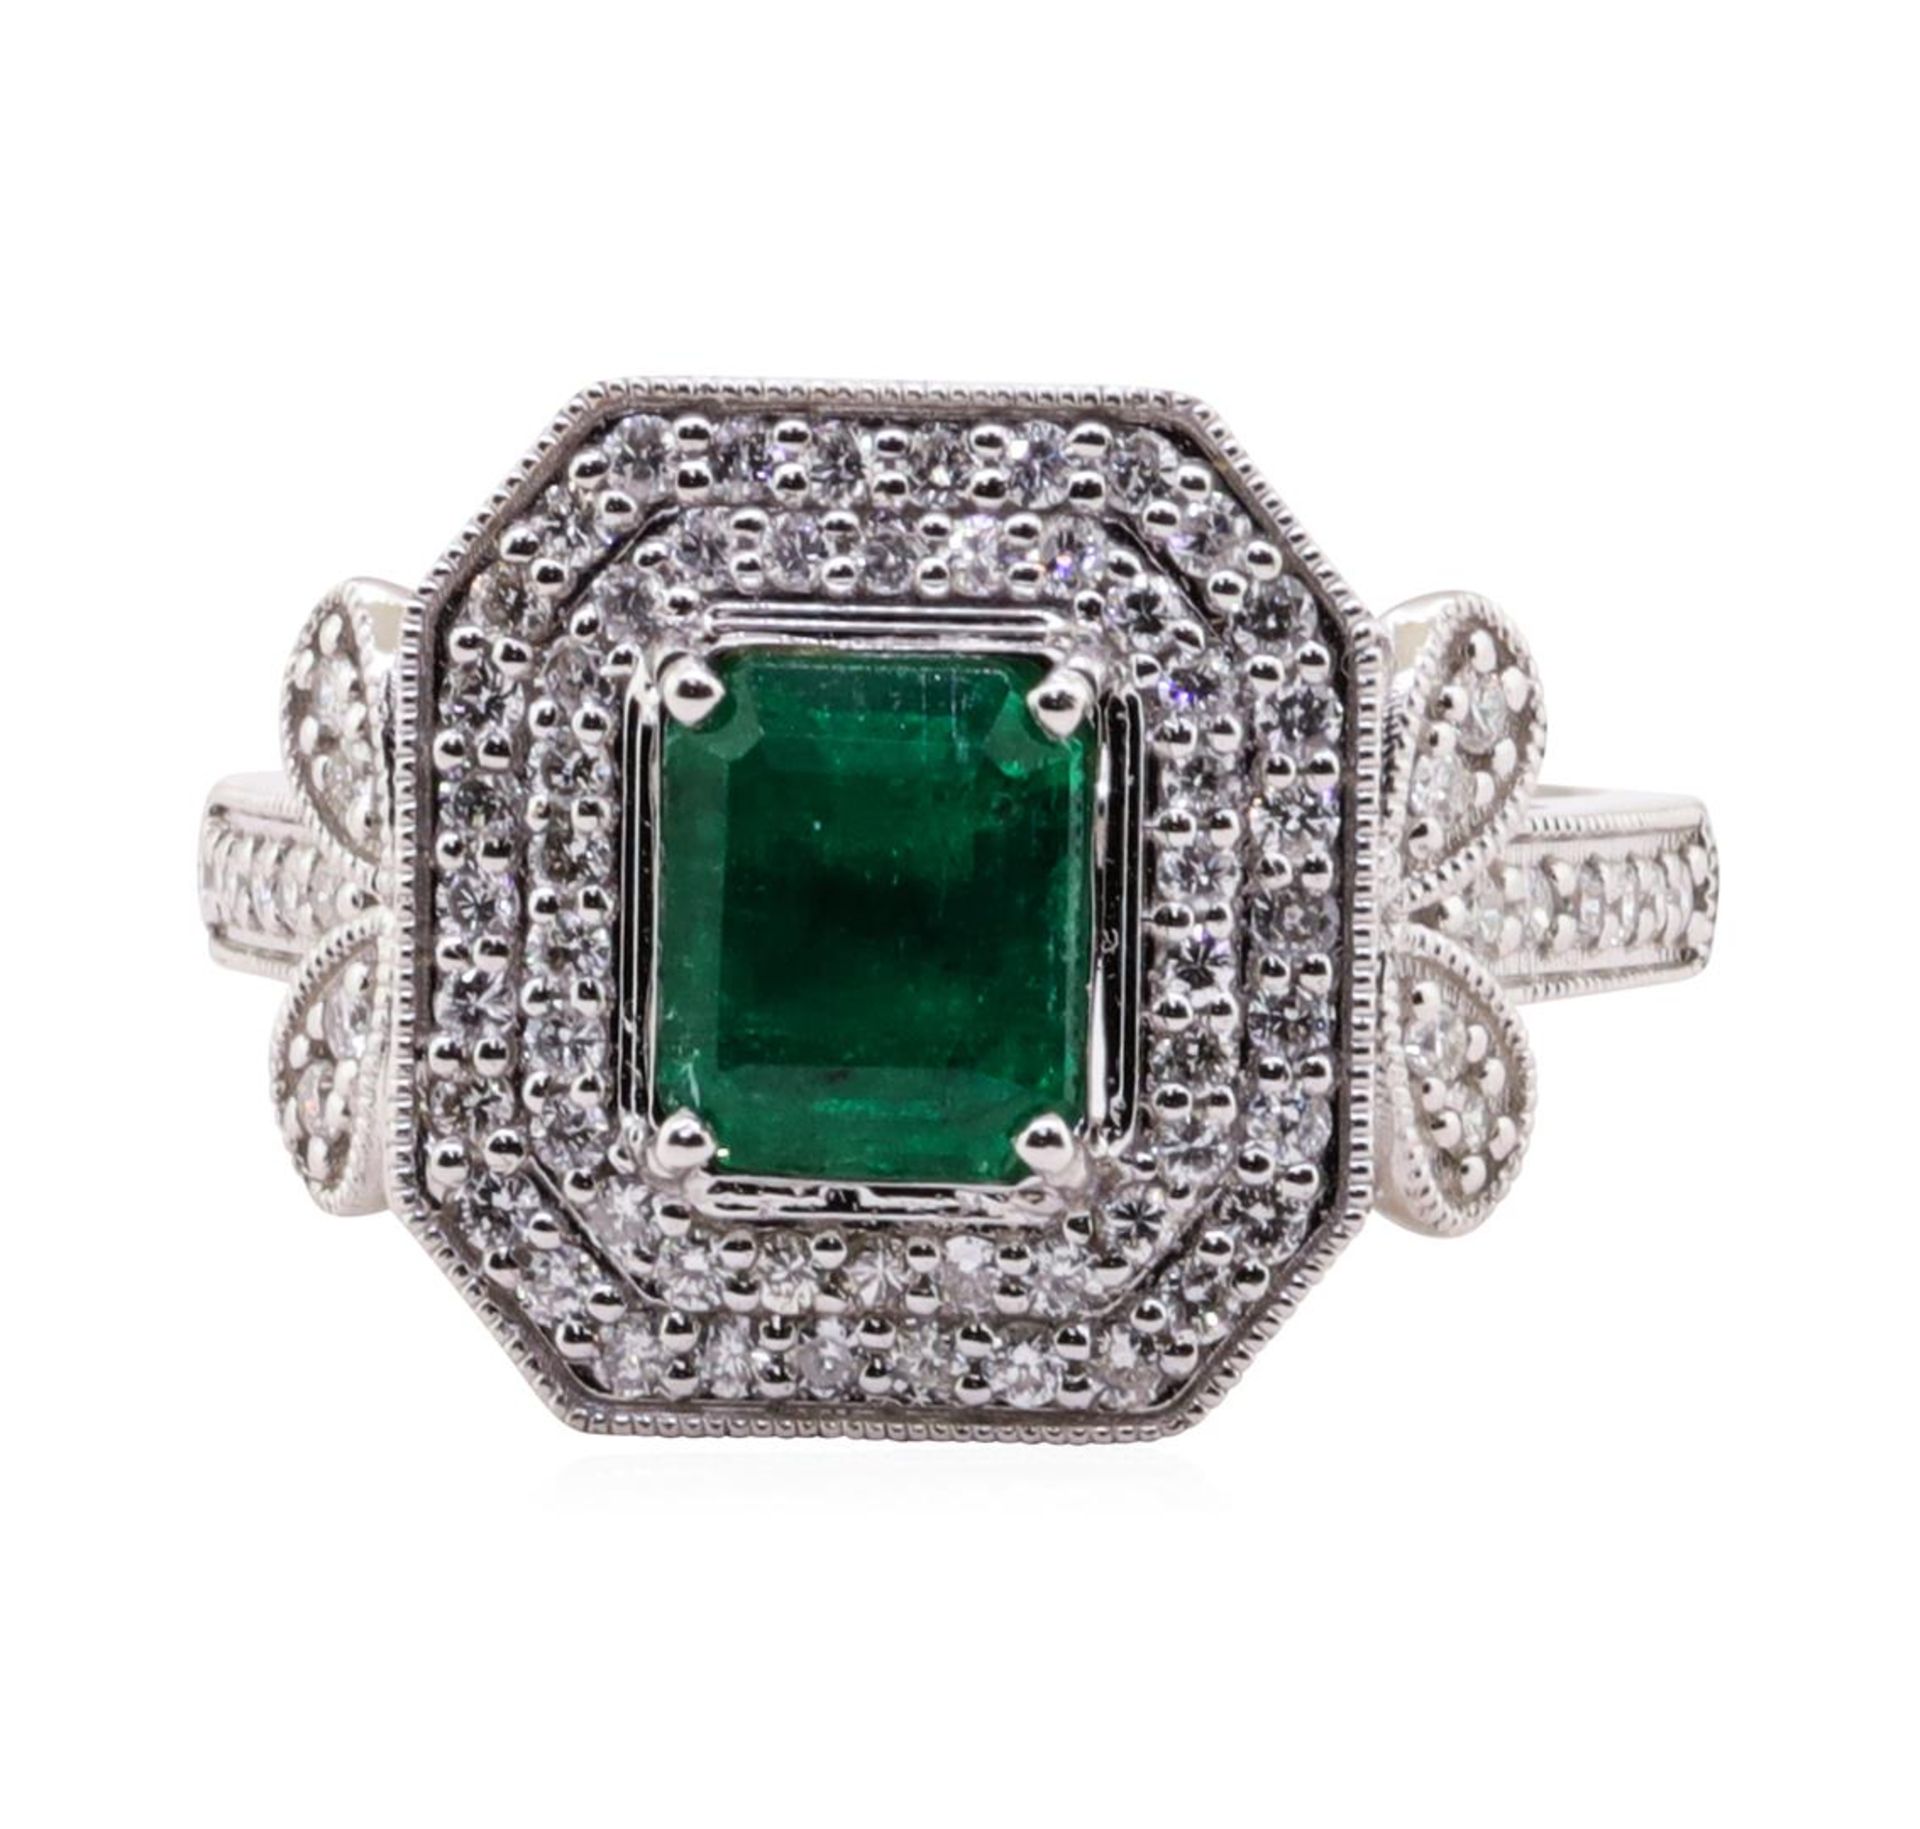 1.15 ctw Emerald and Diamond Ring - 18KT White Gold